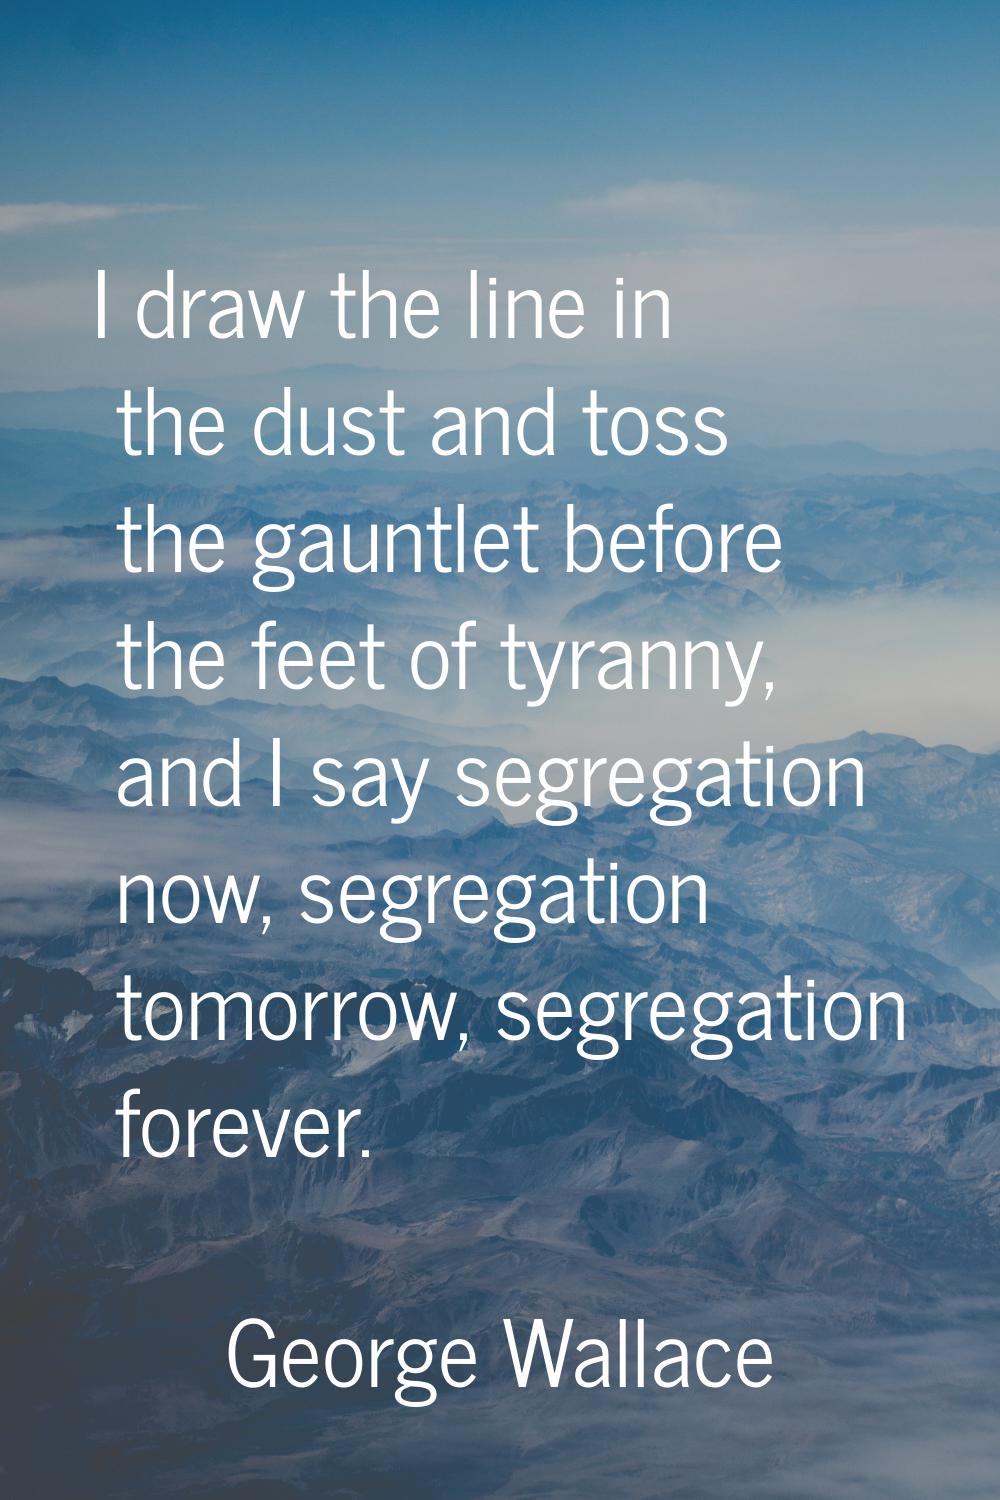 I draw the line in the dust and toss the gauntlet before the feet of tyranny, and I say segregation